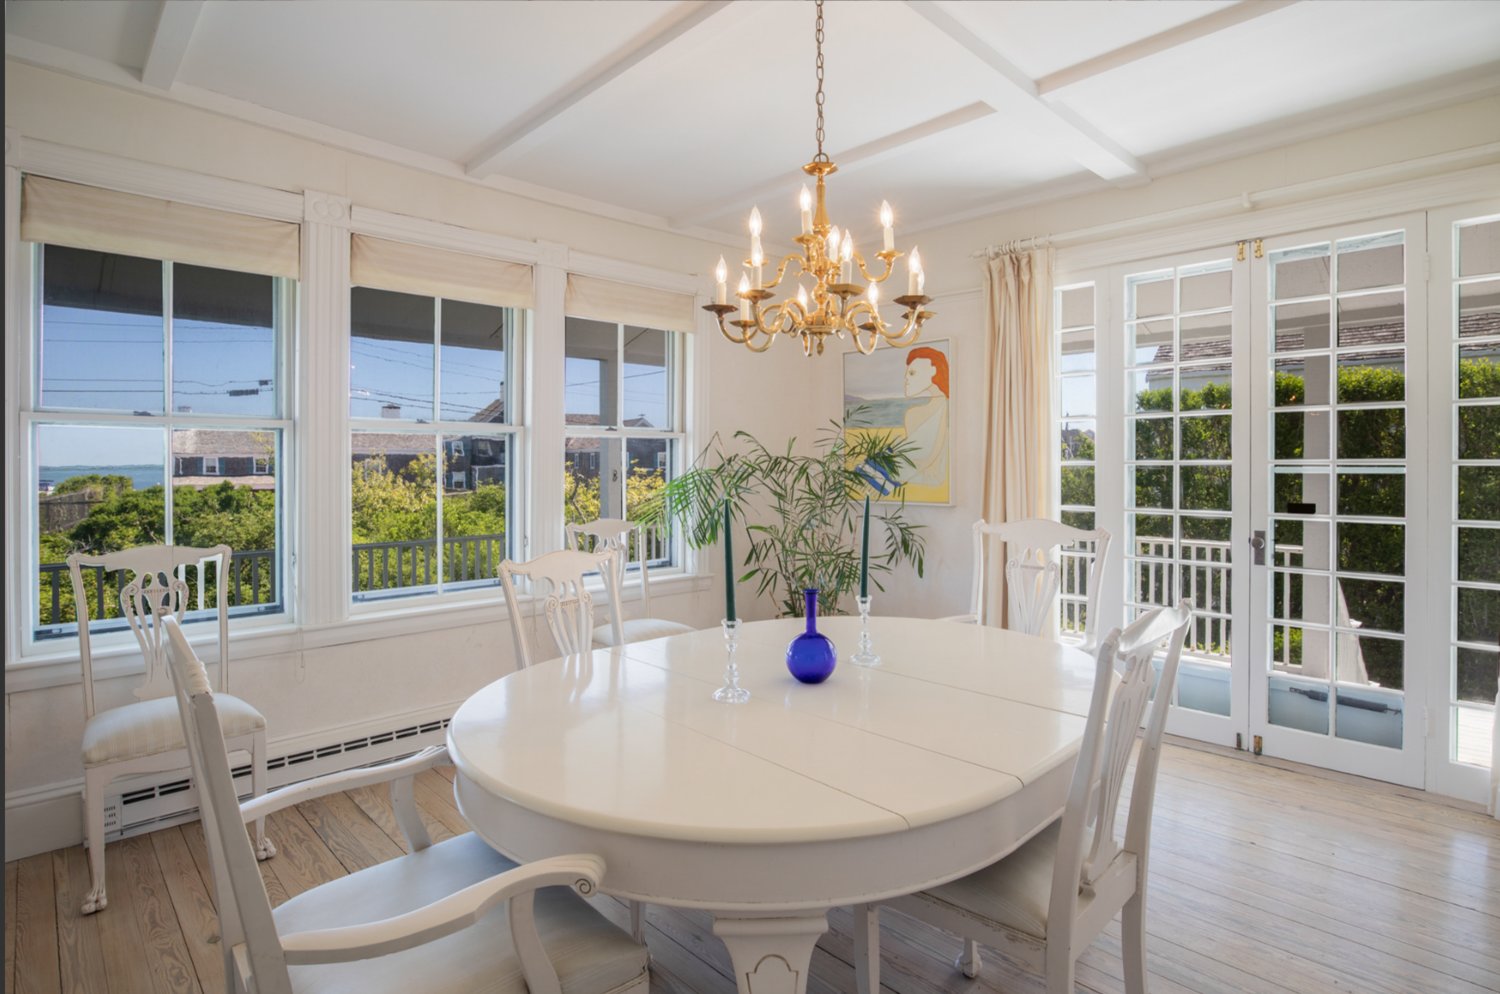 The bright and airy dining room of this Hulbert Avenue home has wood floors, water views and French doors that open to the covered wrap-around porch.